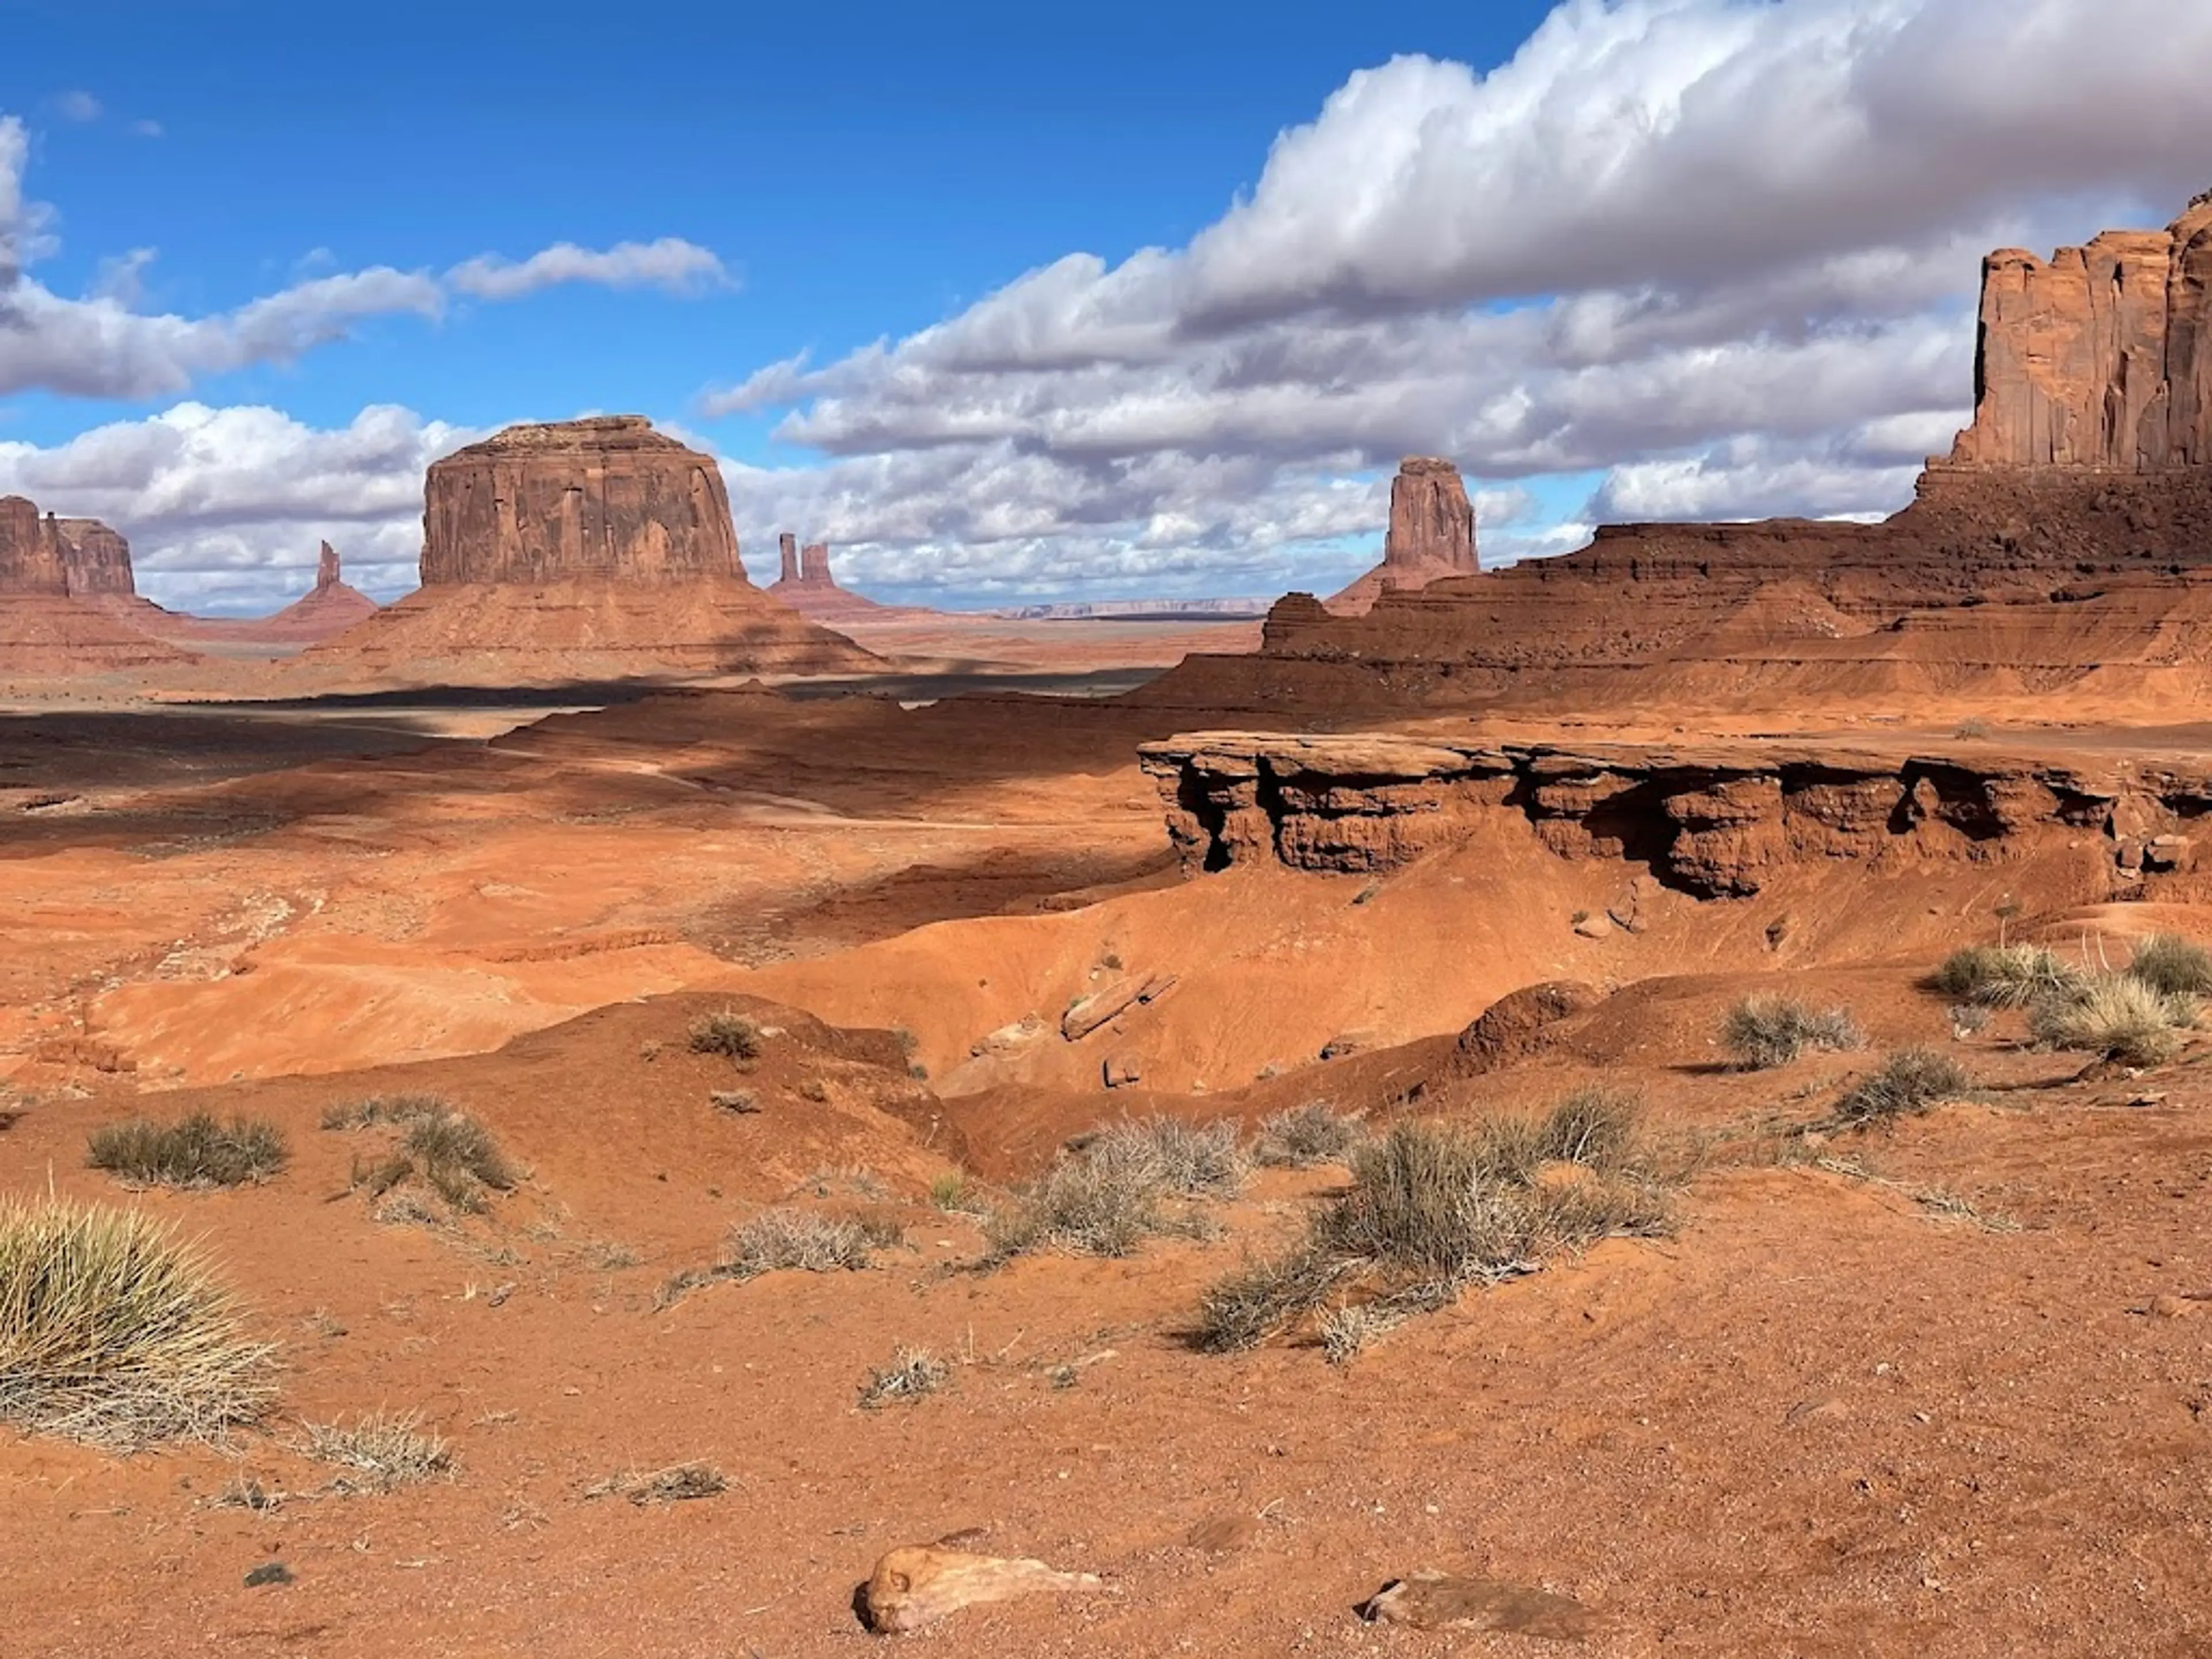 Guided tour through the Monument Valley Navajo Tribal Park